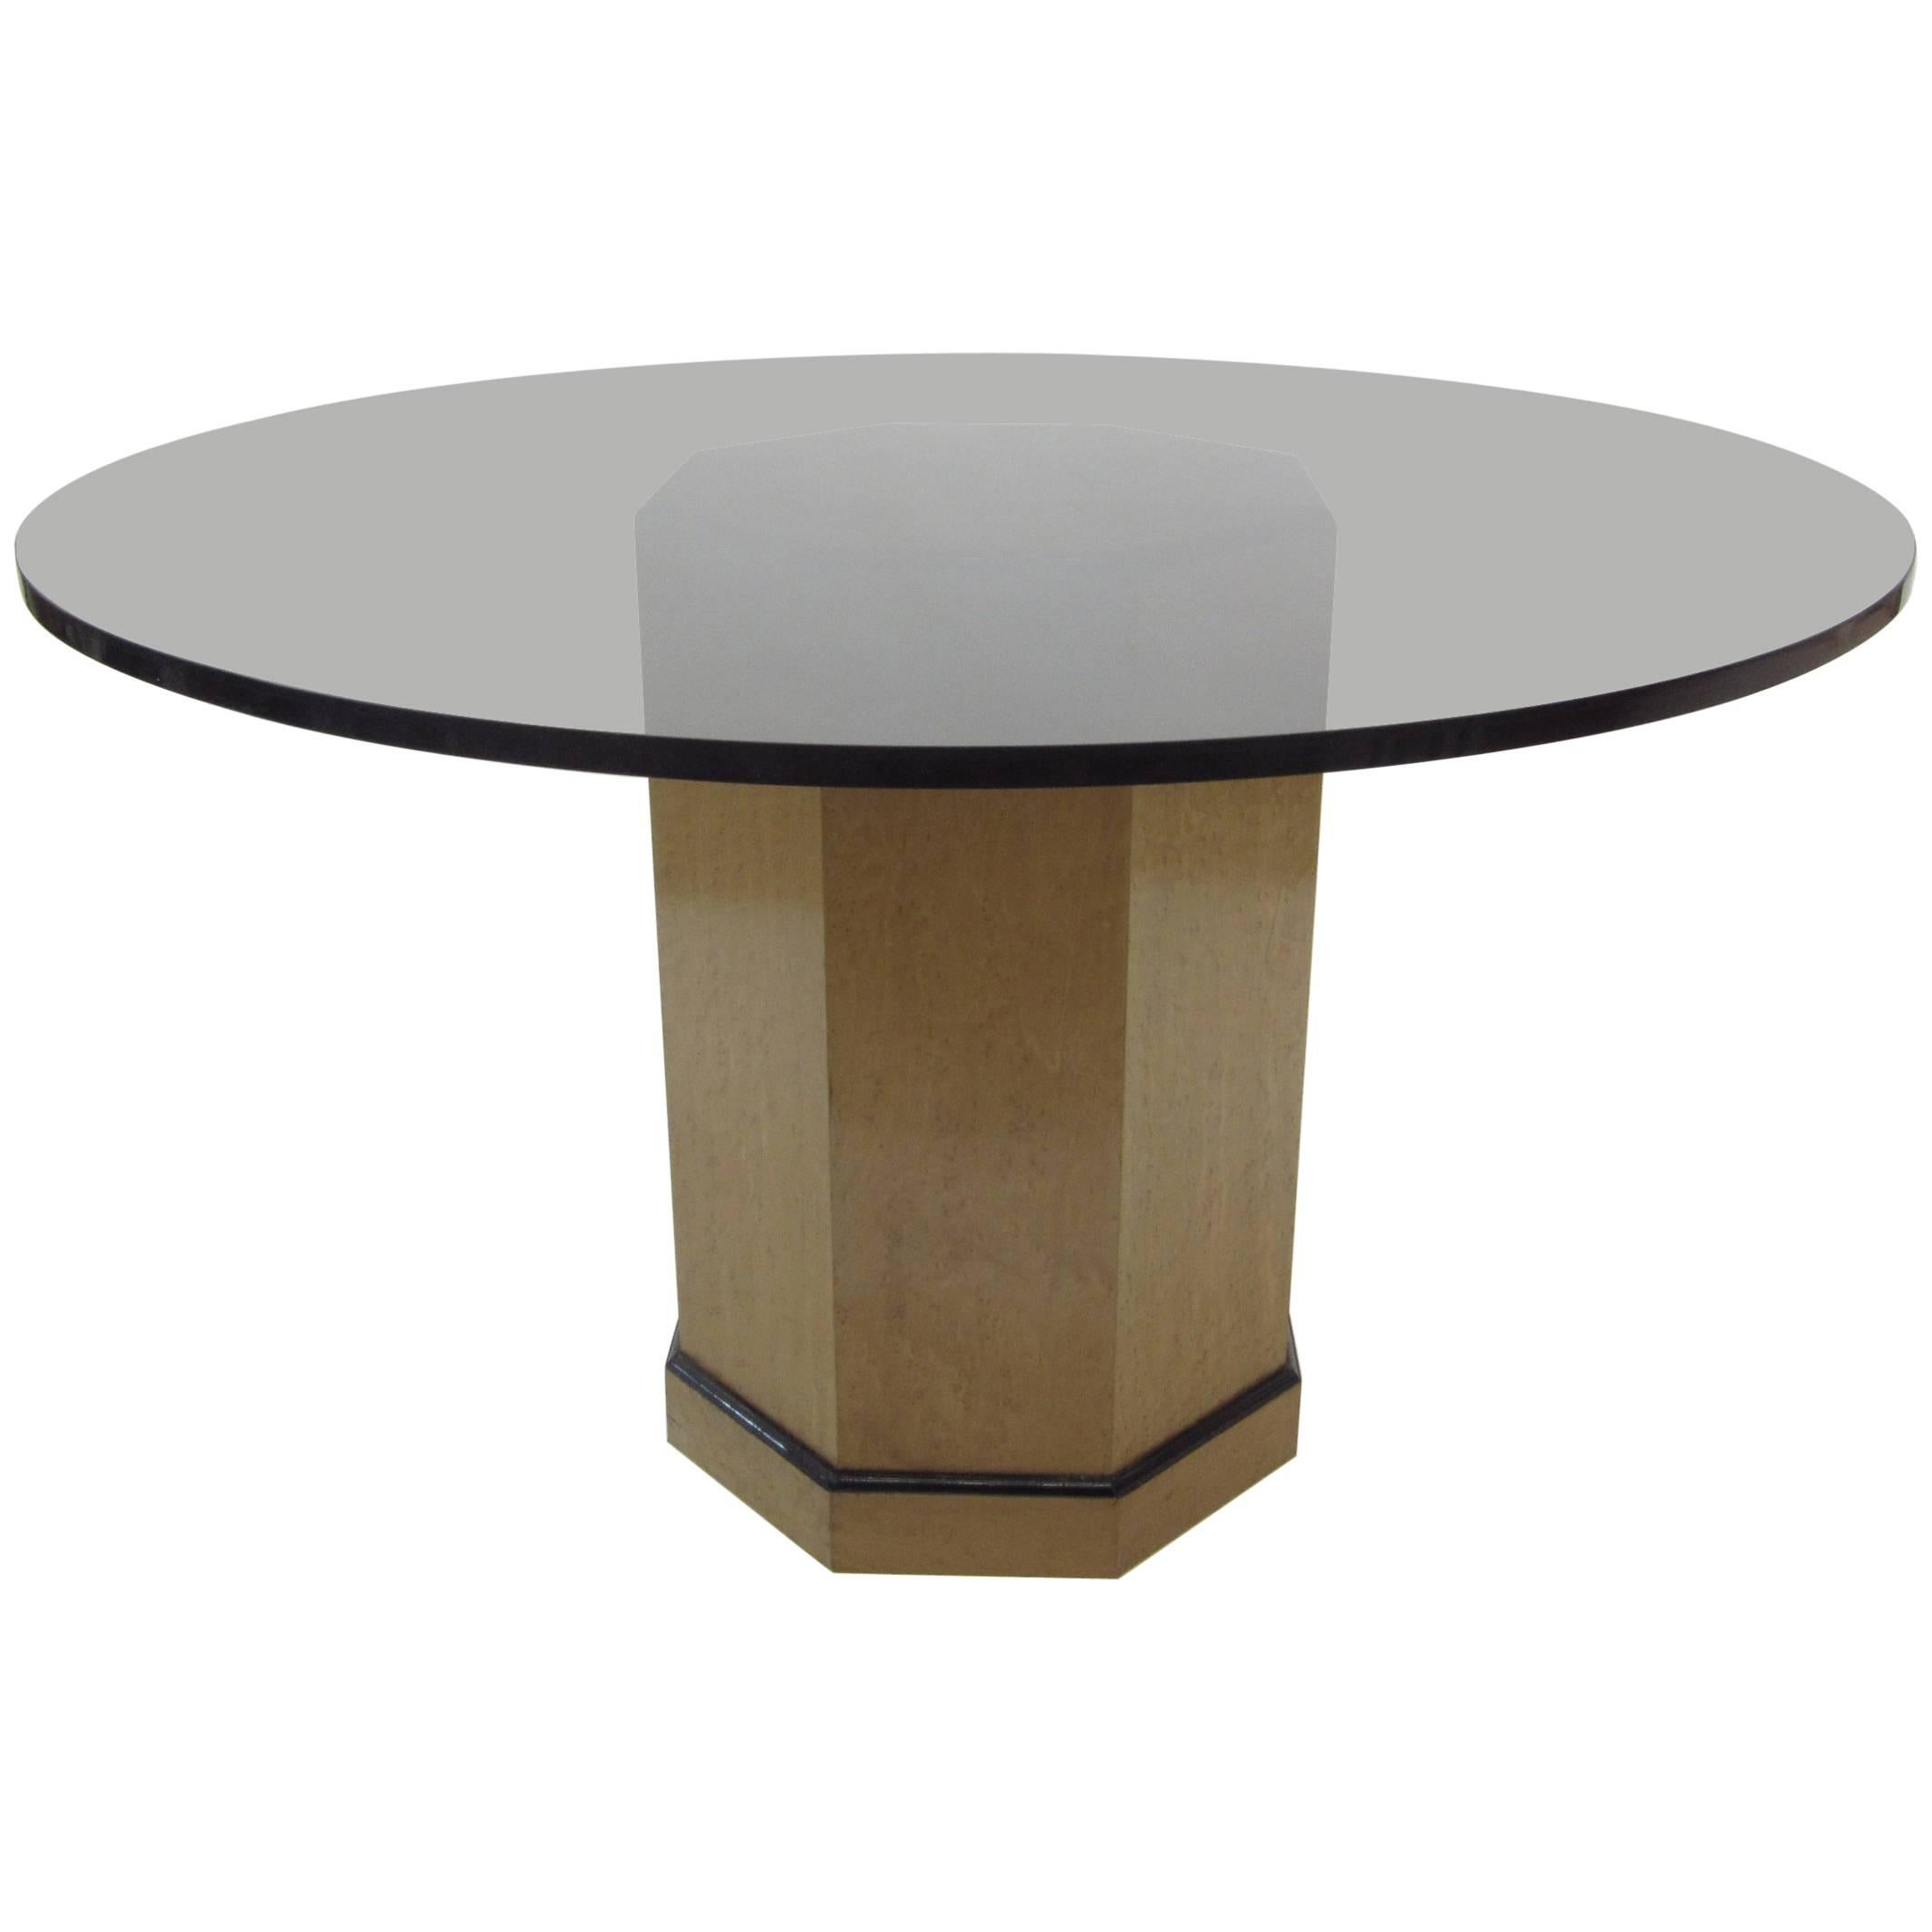 Pedestal Center Entrance Table / Dining Table, with Round Amber Glass Top